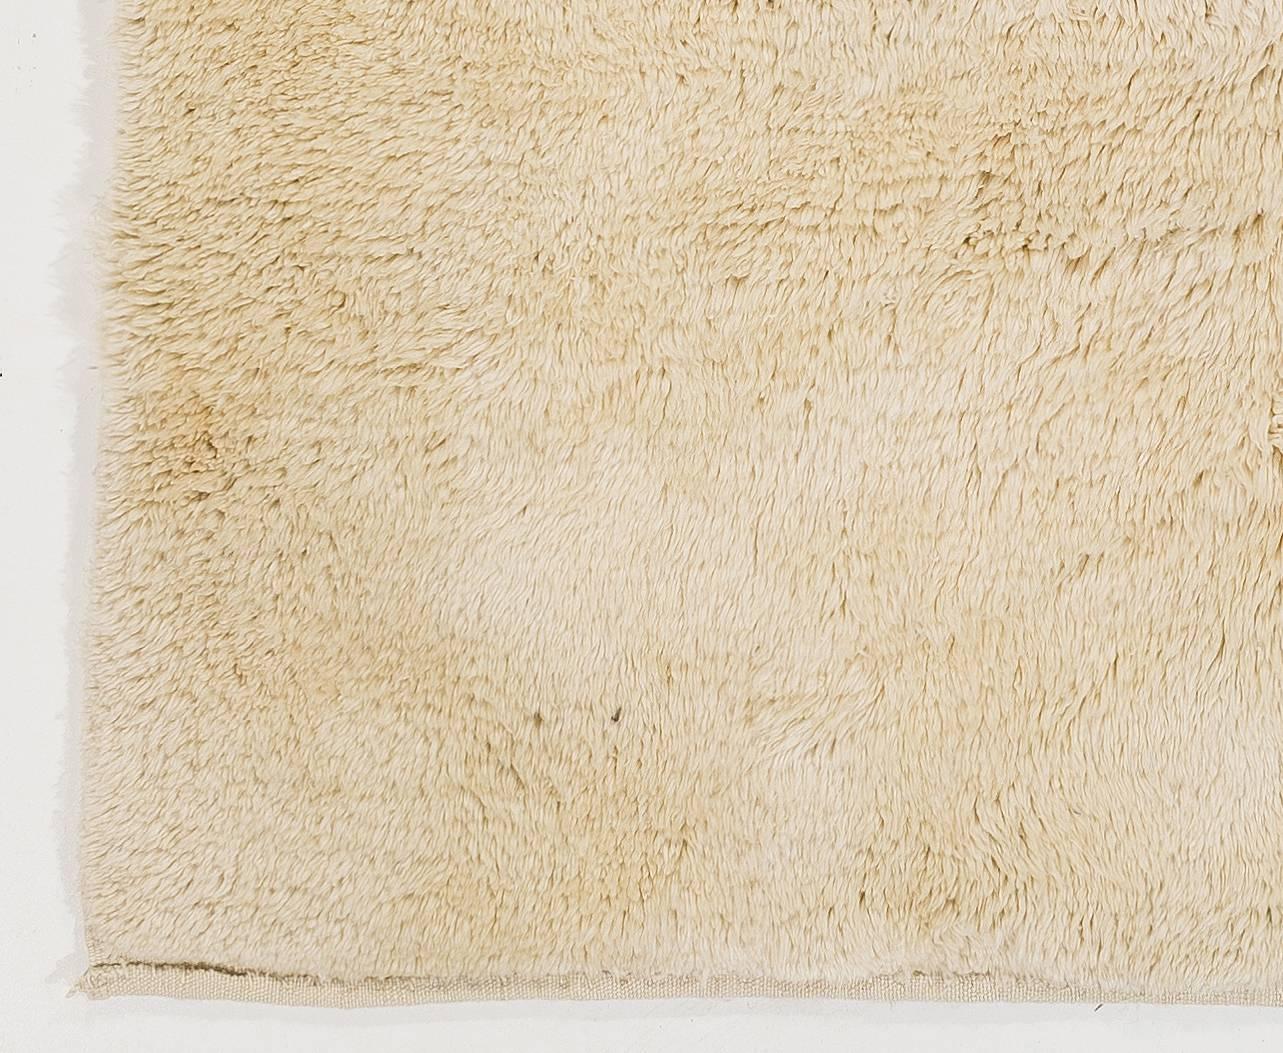 A contemporary handmade Tulu (Turkish word for thick soft pile) rug made of fine natural un-dyed, hand-spun sheep wool.

The rug can be custom produced in a different size, color combination, any pattern and weave any design in approximately 5 weeks.